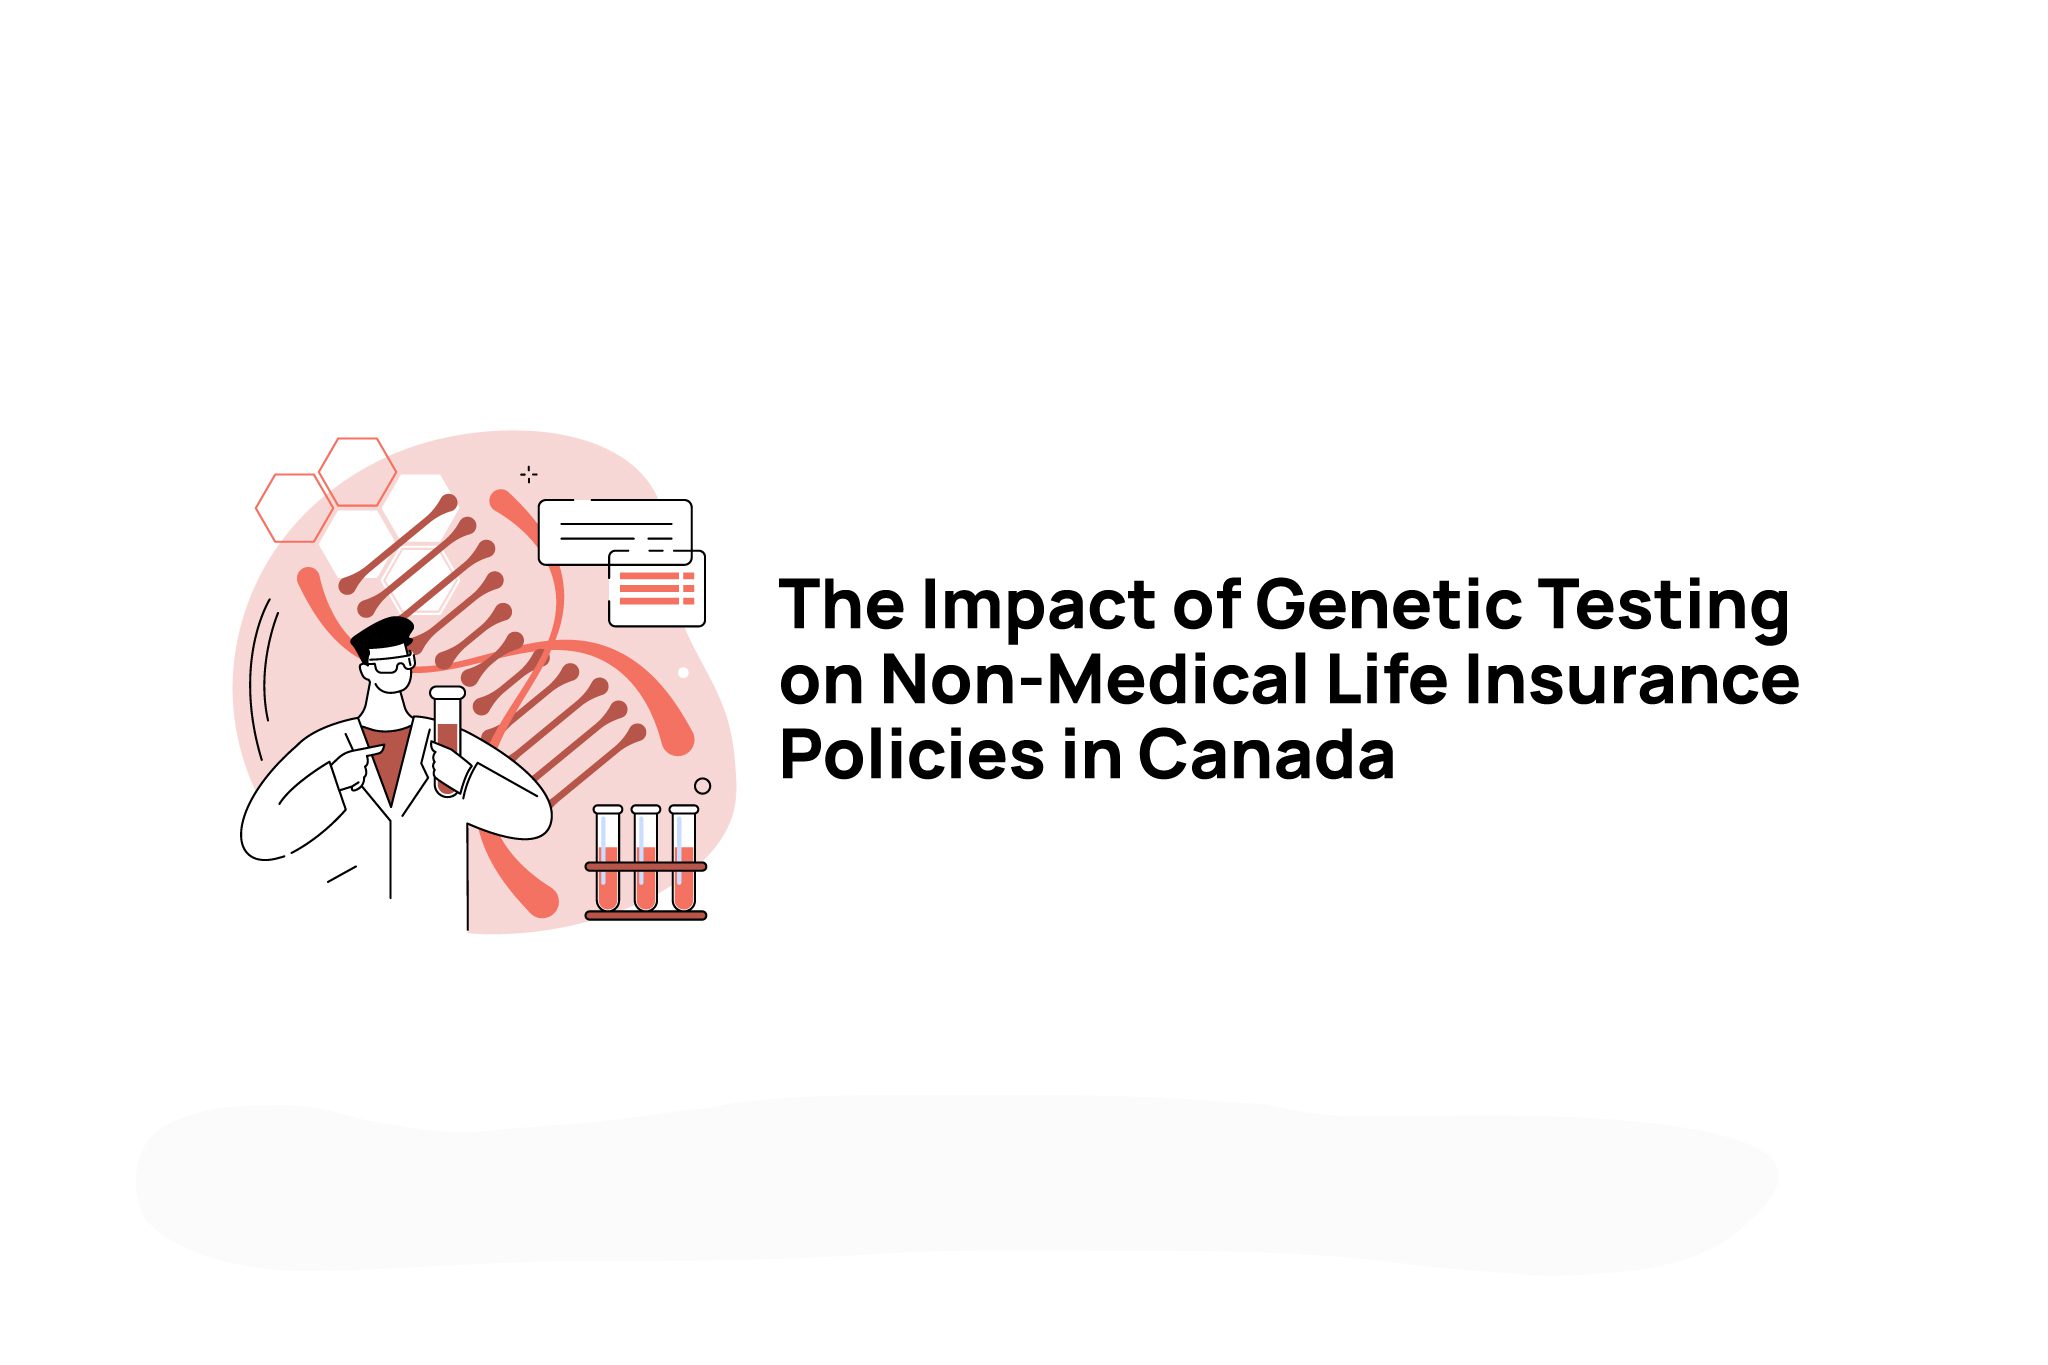 The Impact of Genetic Testing on Non-Medical Life Insurance Policies in Canada